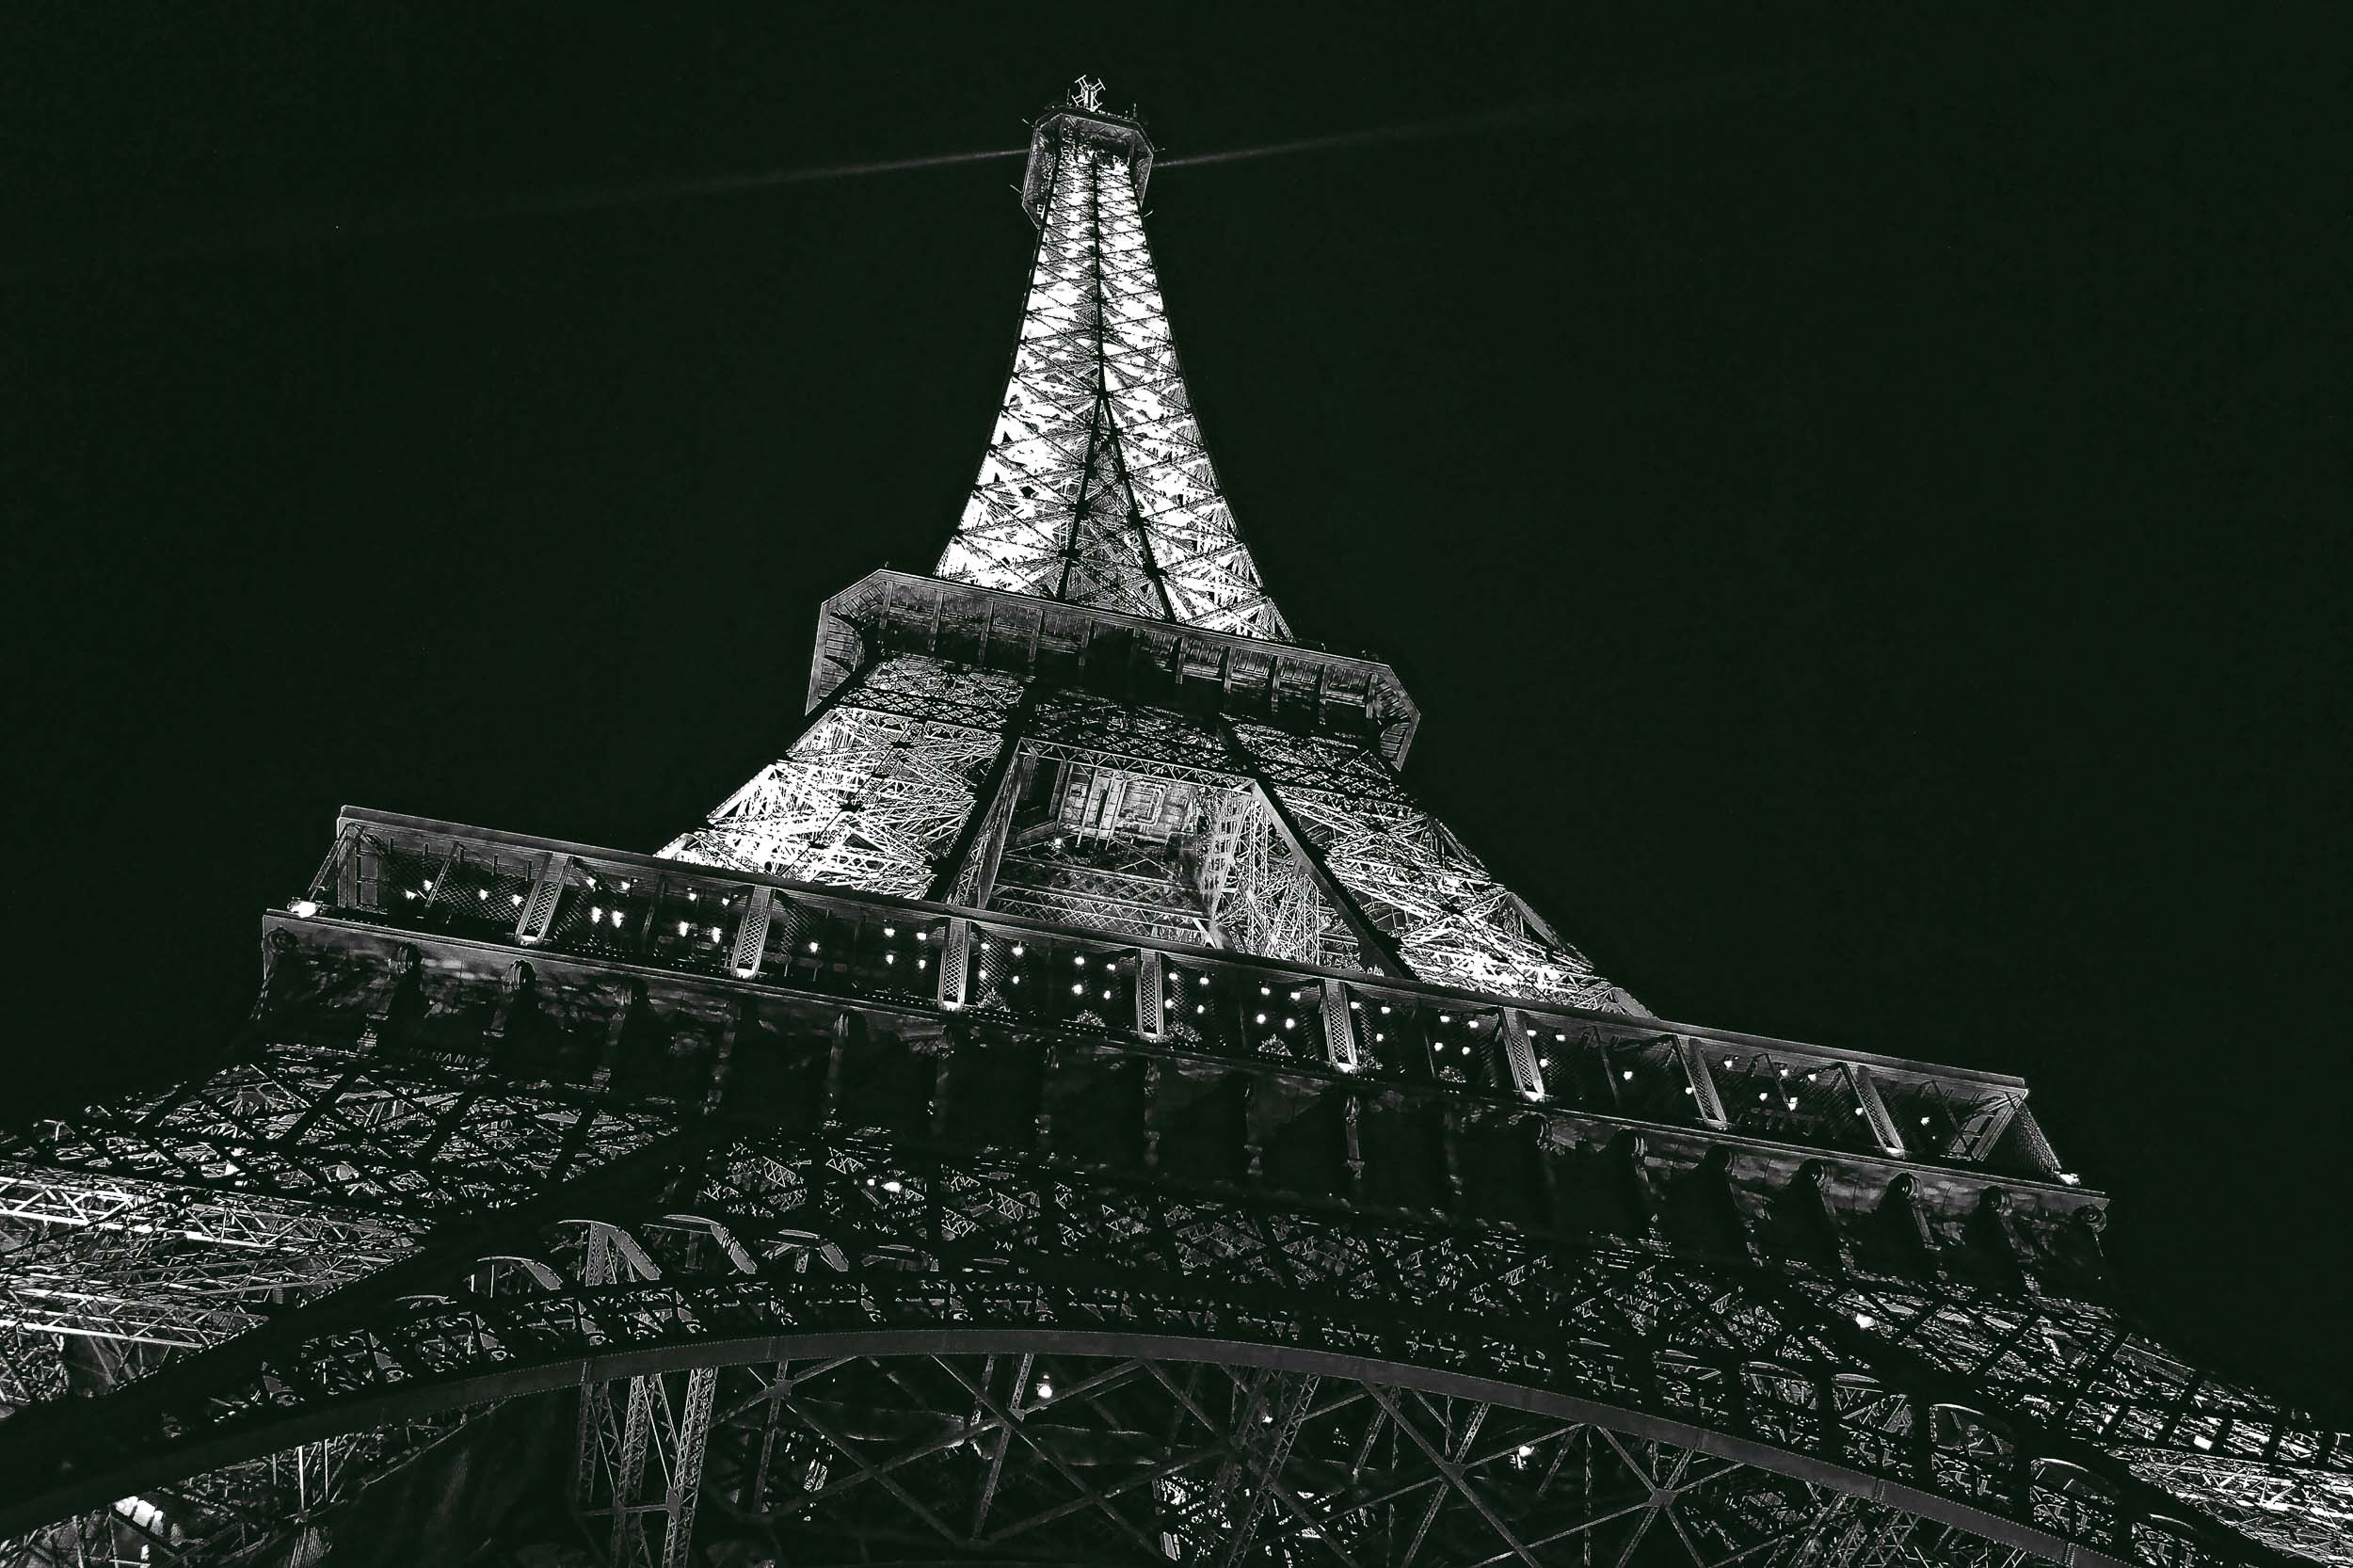 The Eiffel Tower lit up at night time